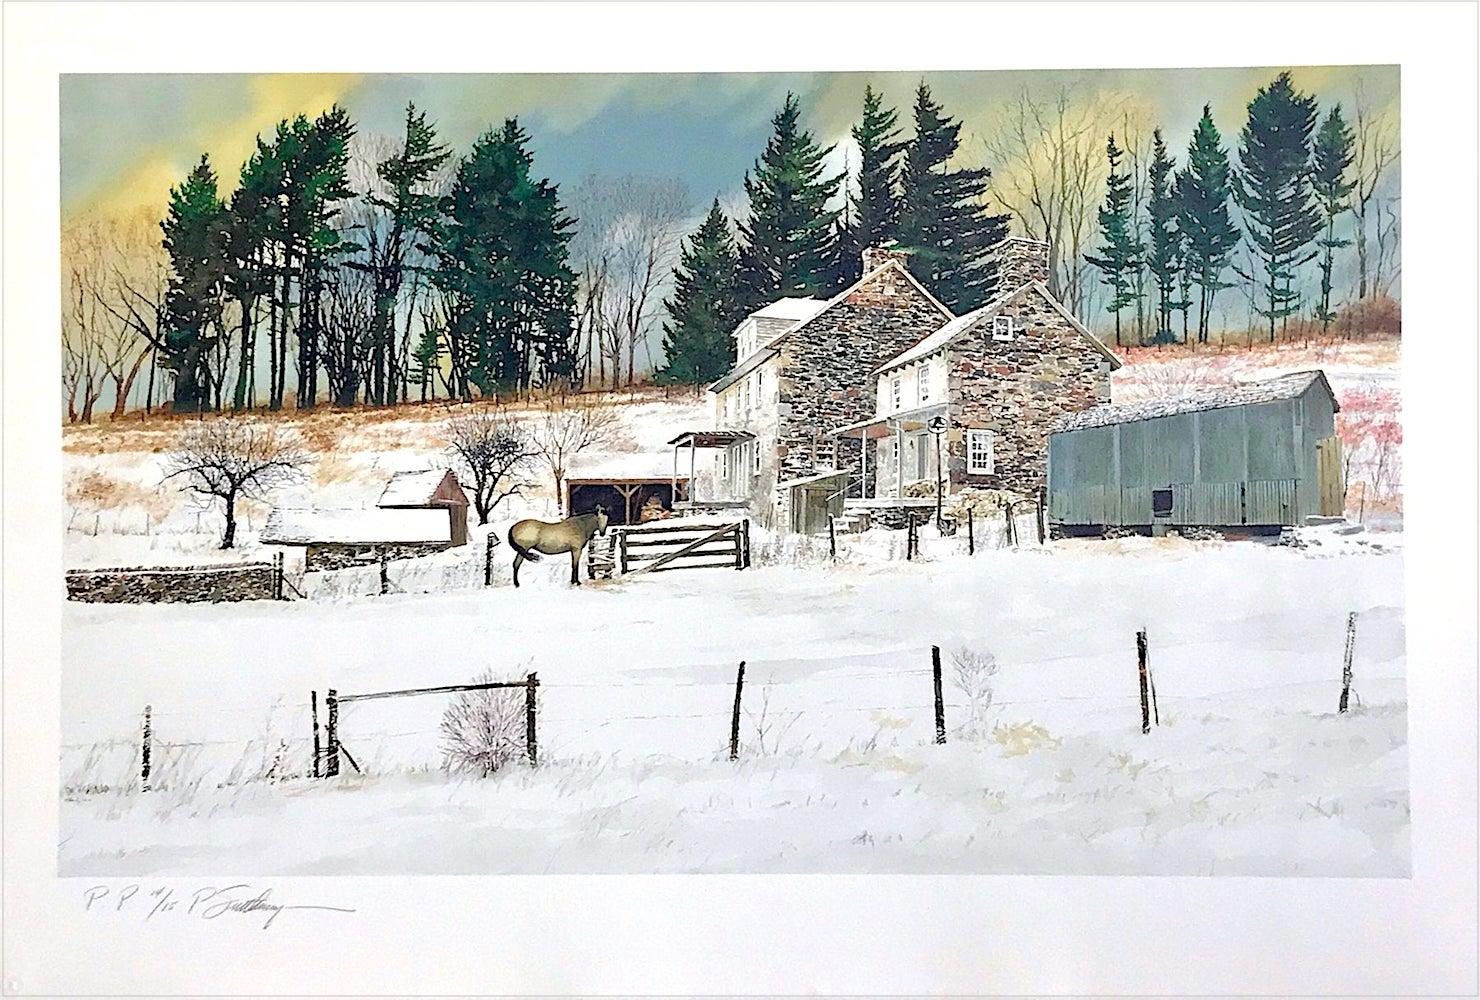 LITTLEWOODS, Signed Lithograph, Historic Stone Farmhouse, Bucks County Landscape - Realist Print by Peter Sculthorpe